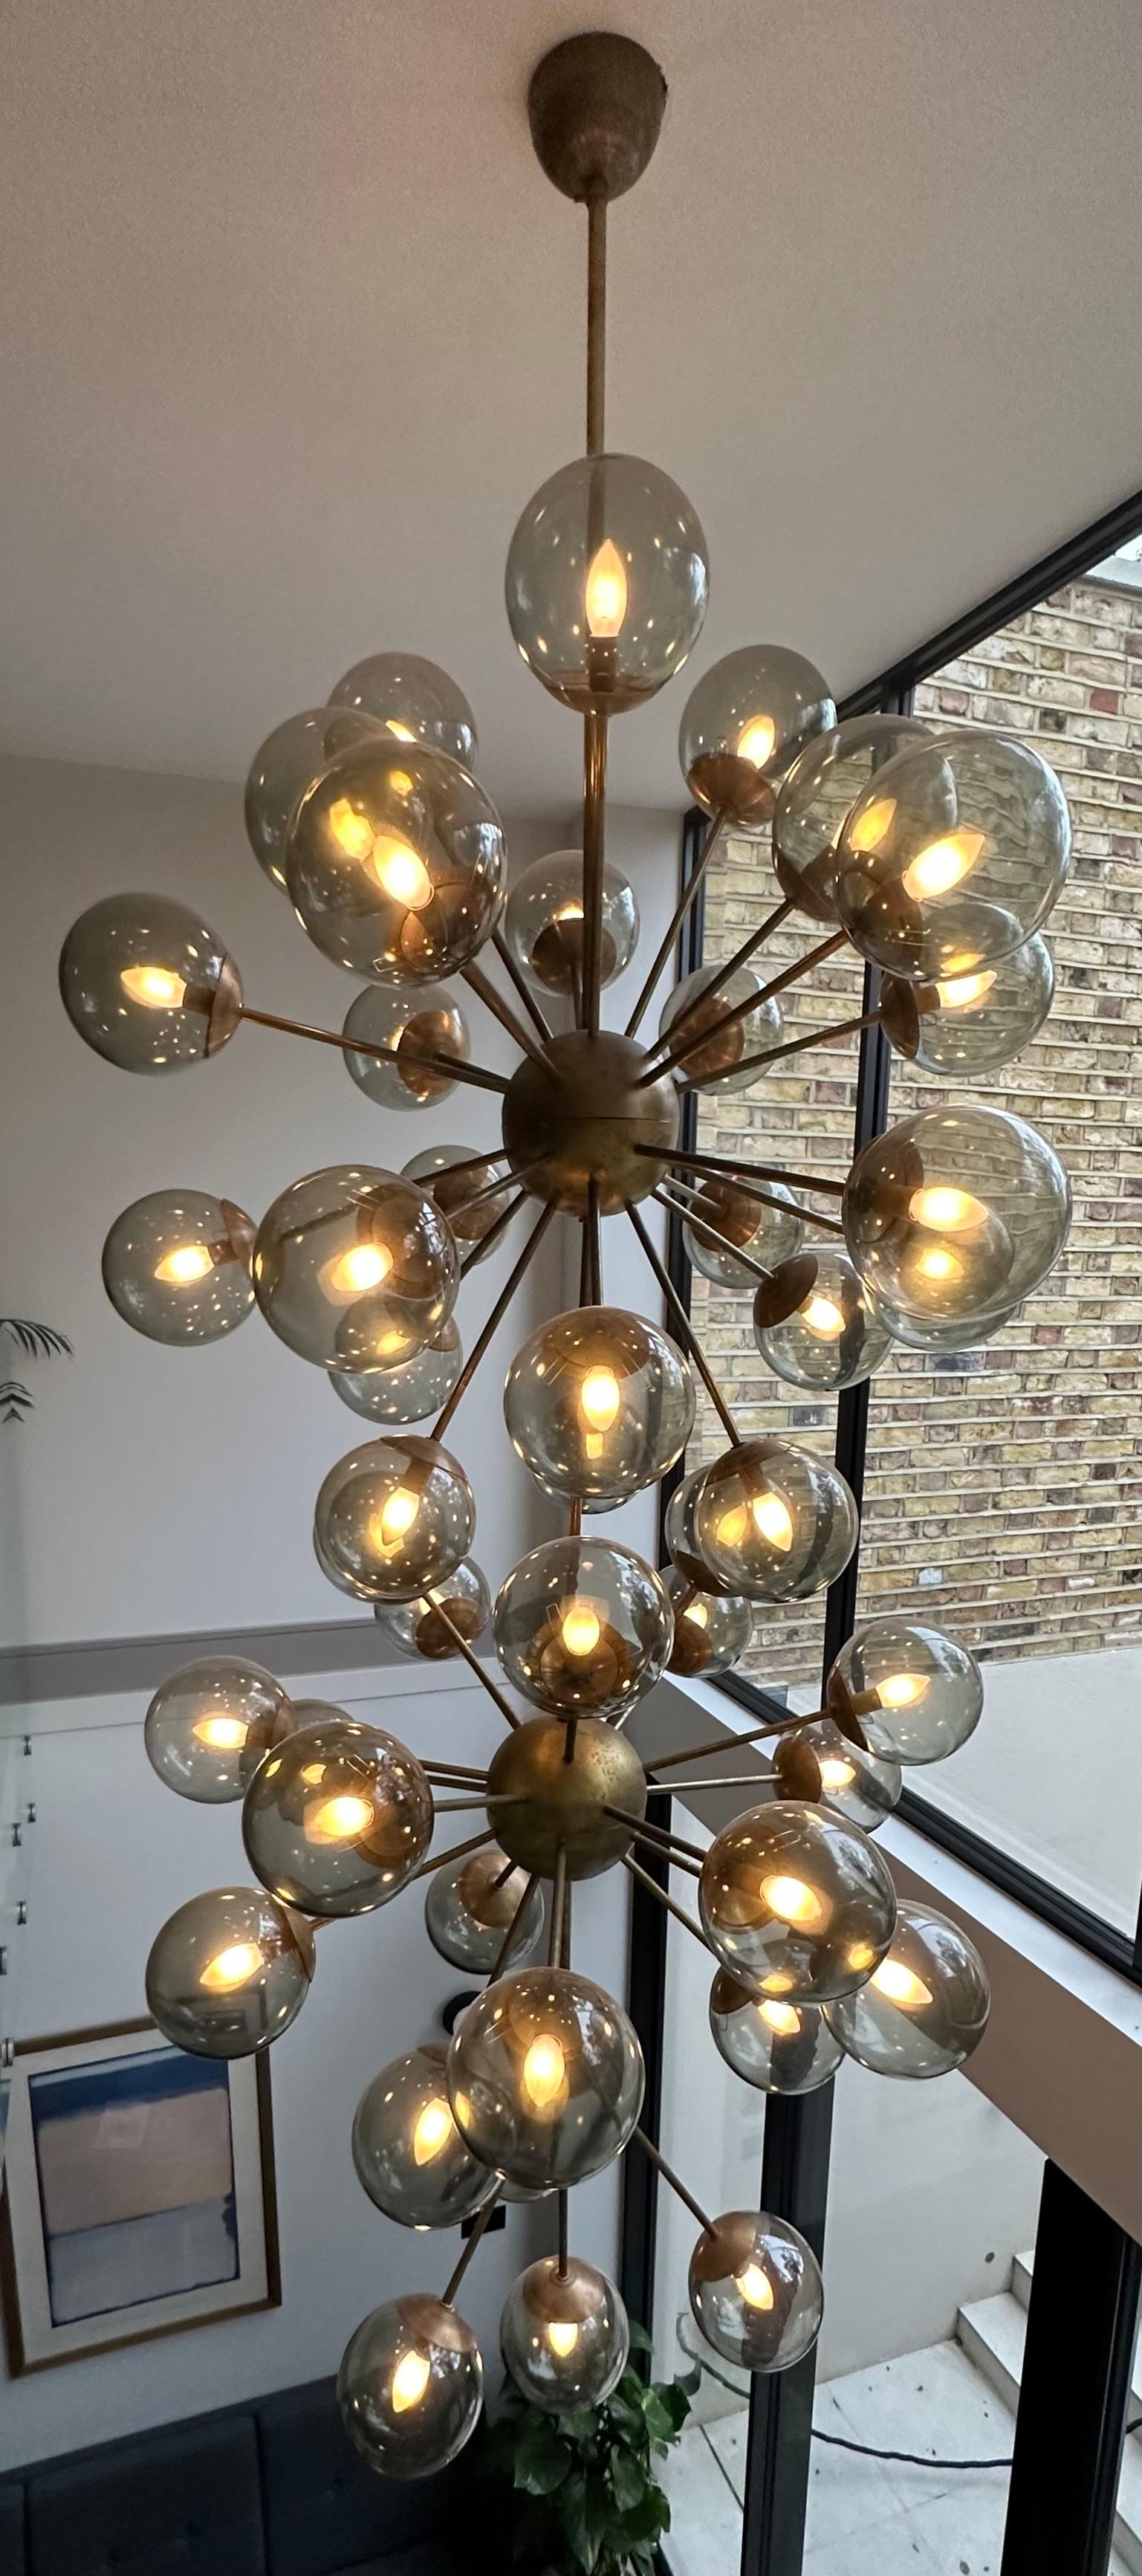 An amazing and quite spectacular space-age & futuristic 1980s Italian Murano glass globe & aged-brass sputnik chandelier.  Made in Italy.  The three inter-connected aged brass globes support each of the 48 arms with a smoked-green glass globe at